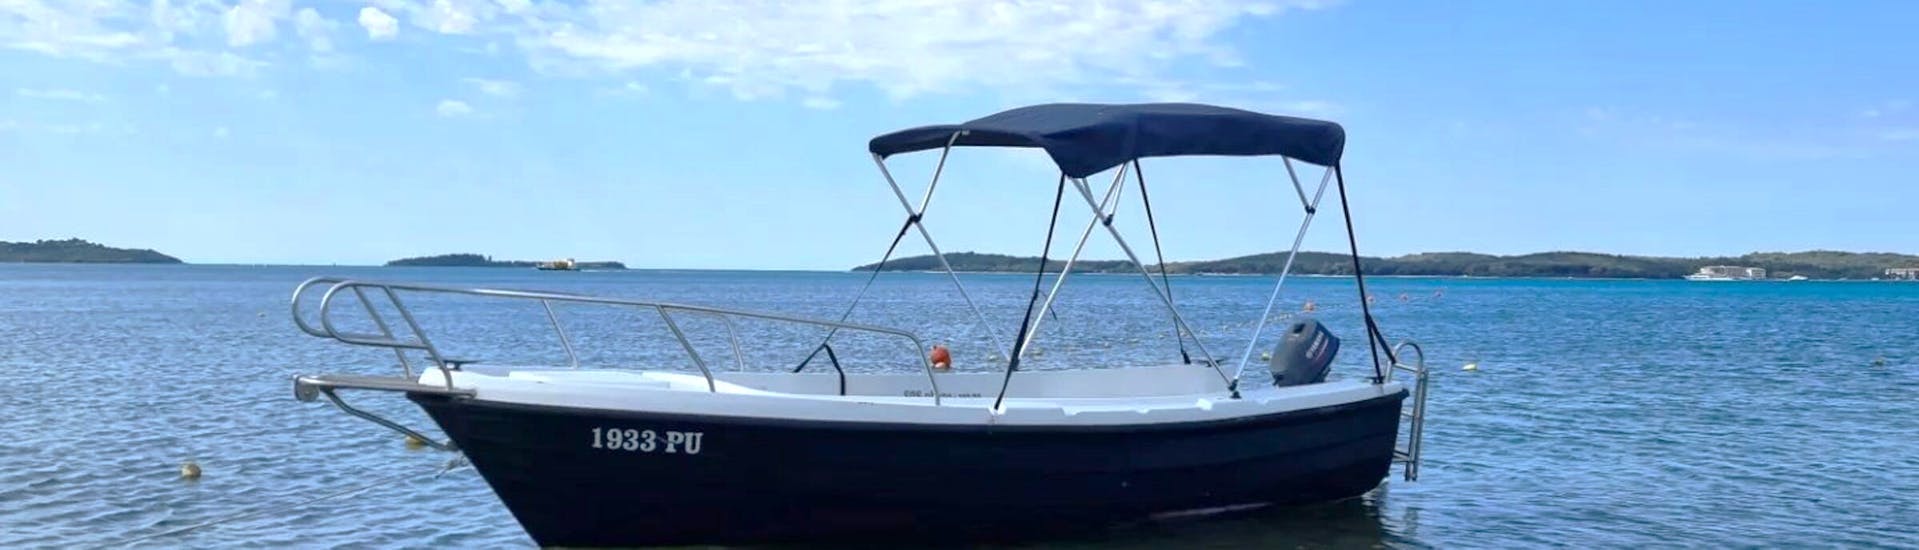 Here is a boat you can rent from Alex Rentals Fažana.